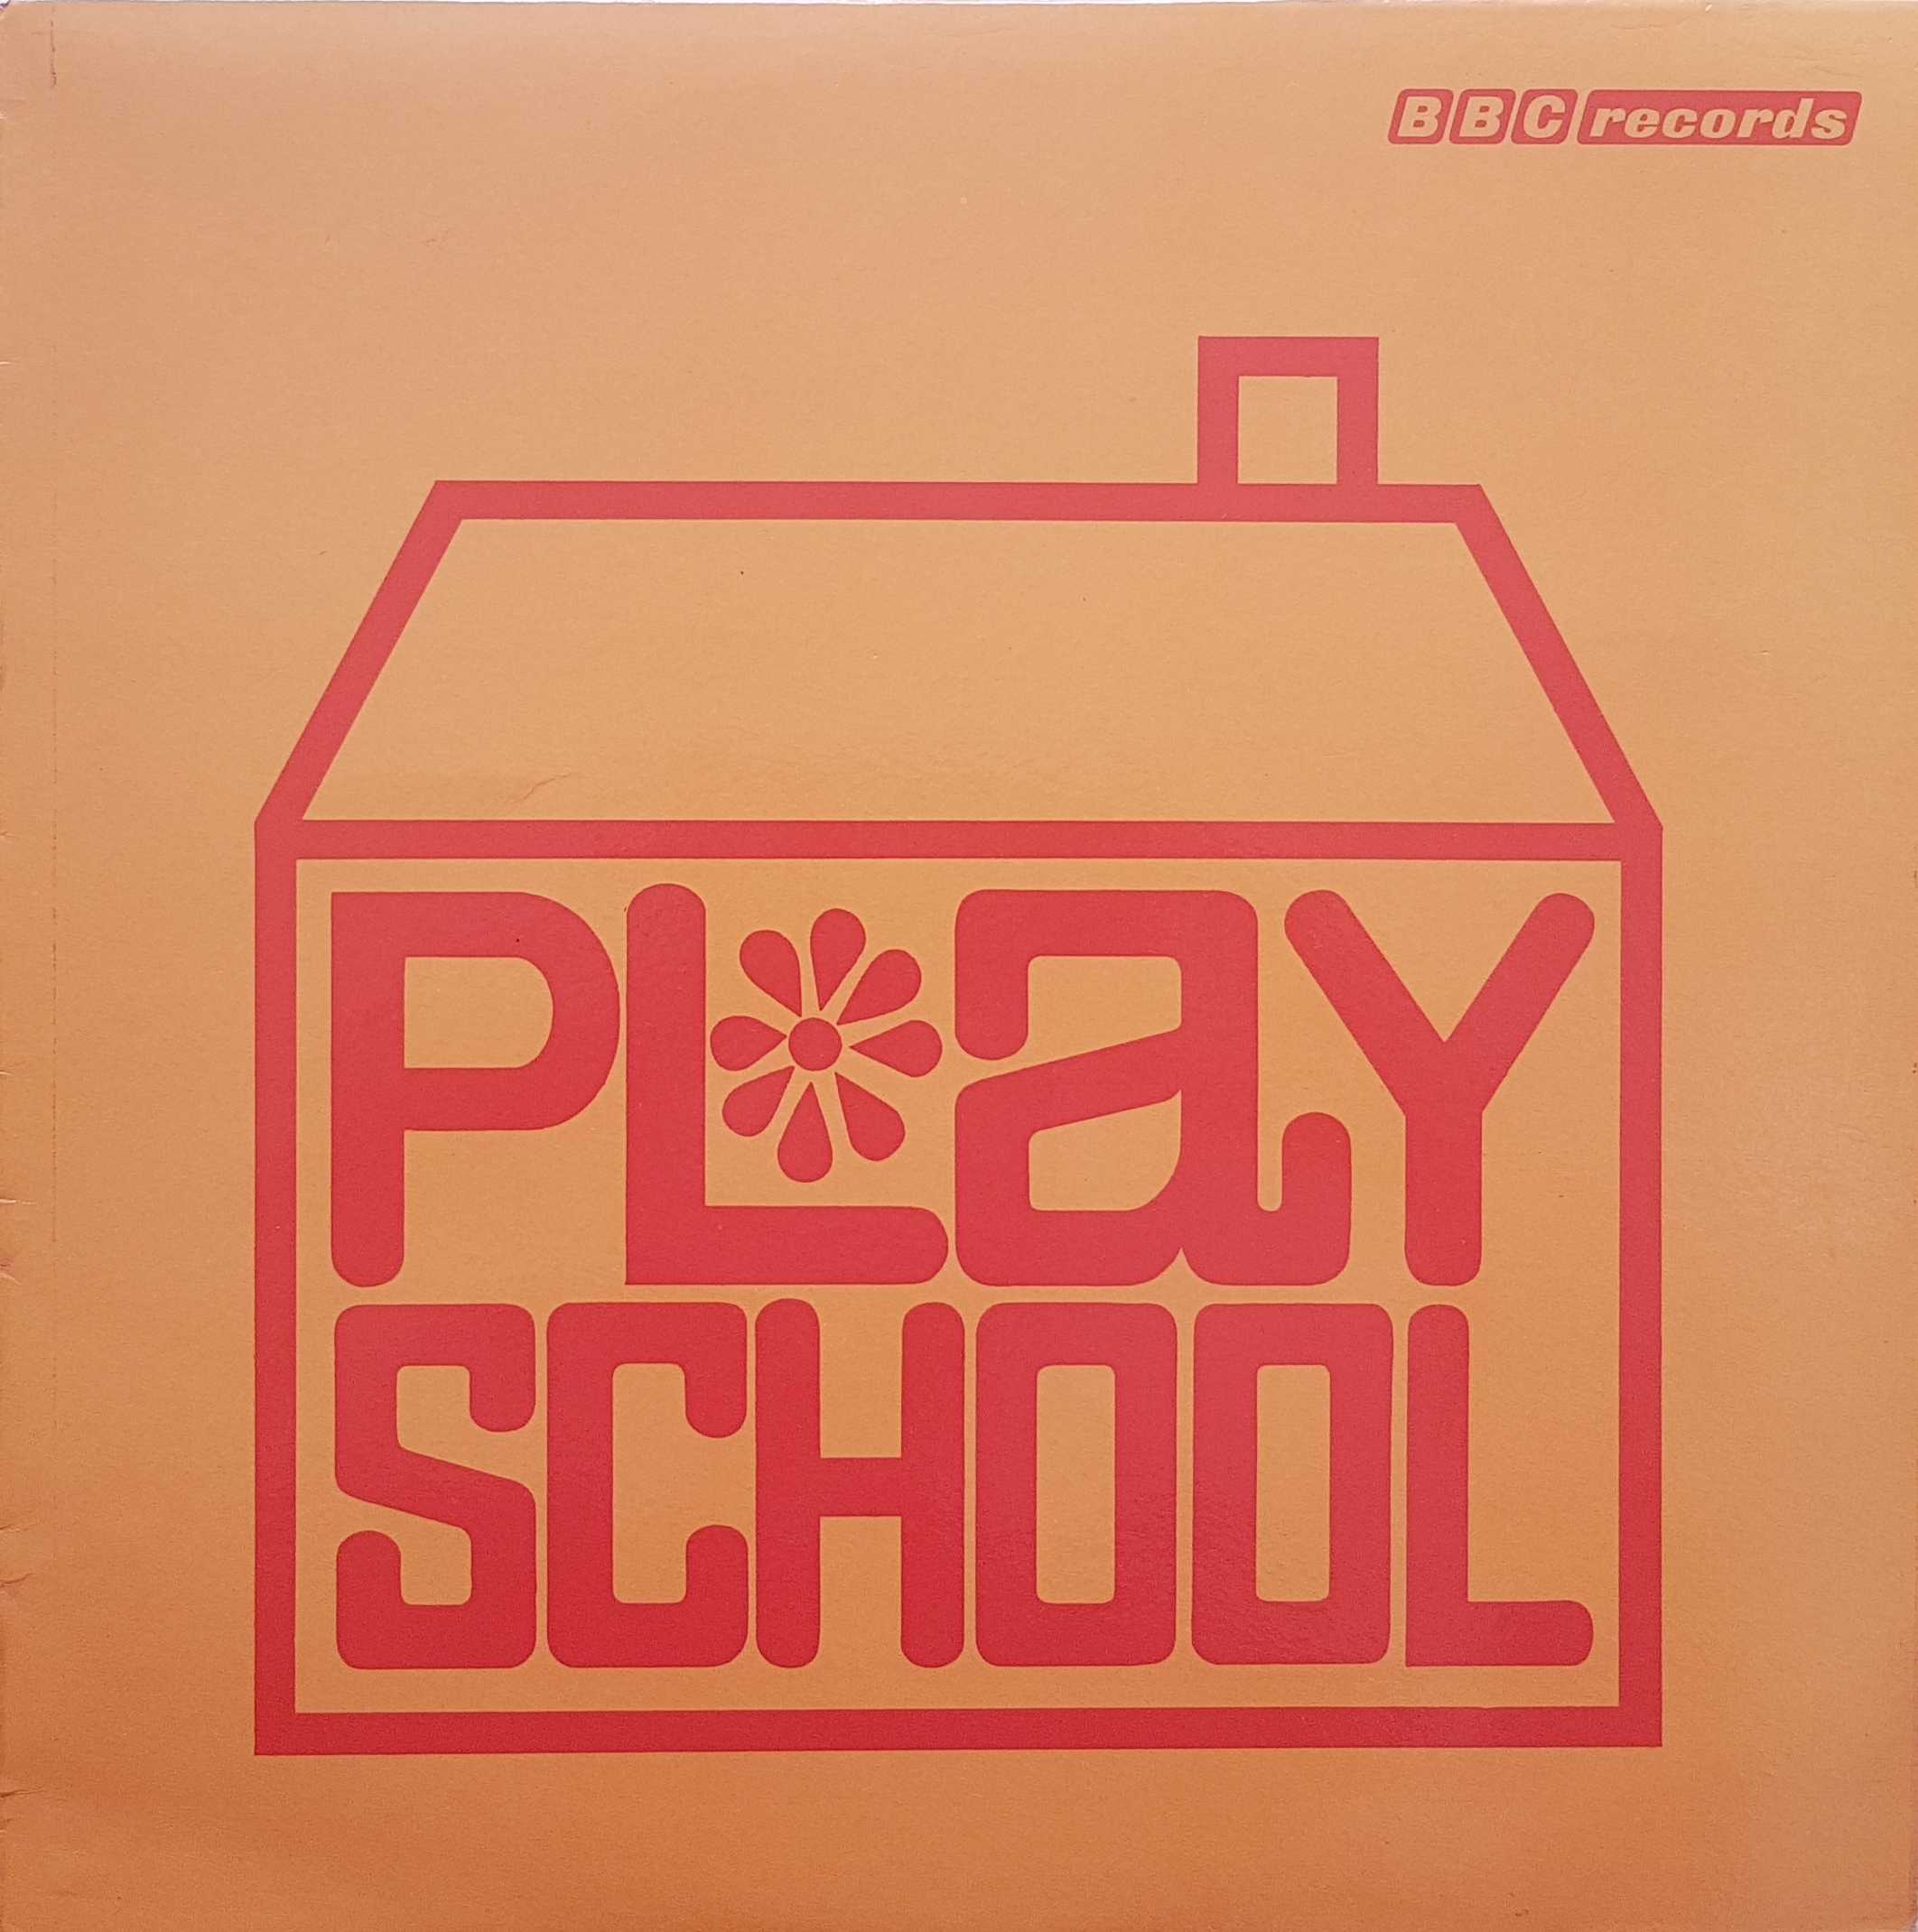 Picture of RBT 10 Playschool by artist Various from the BBC albums - Records and Tapes library